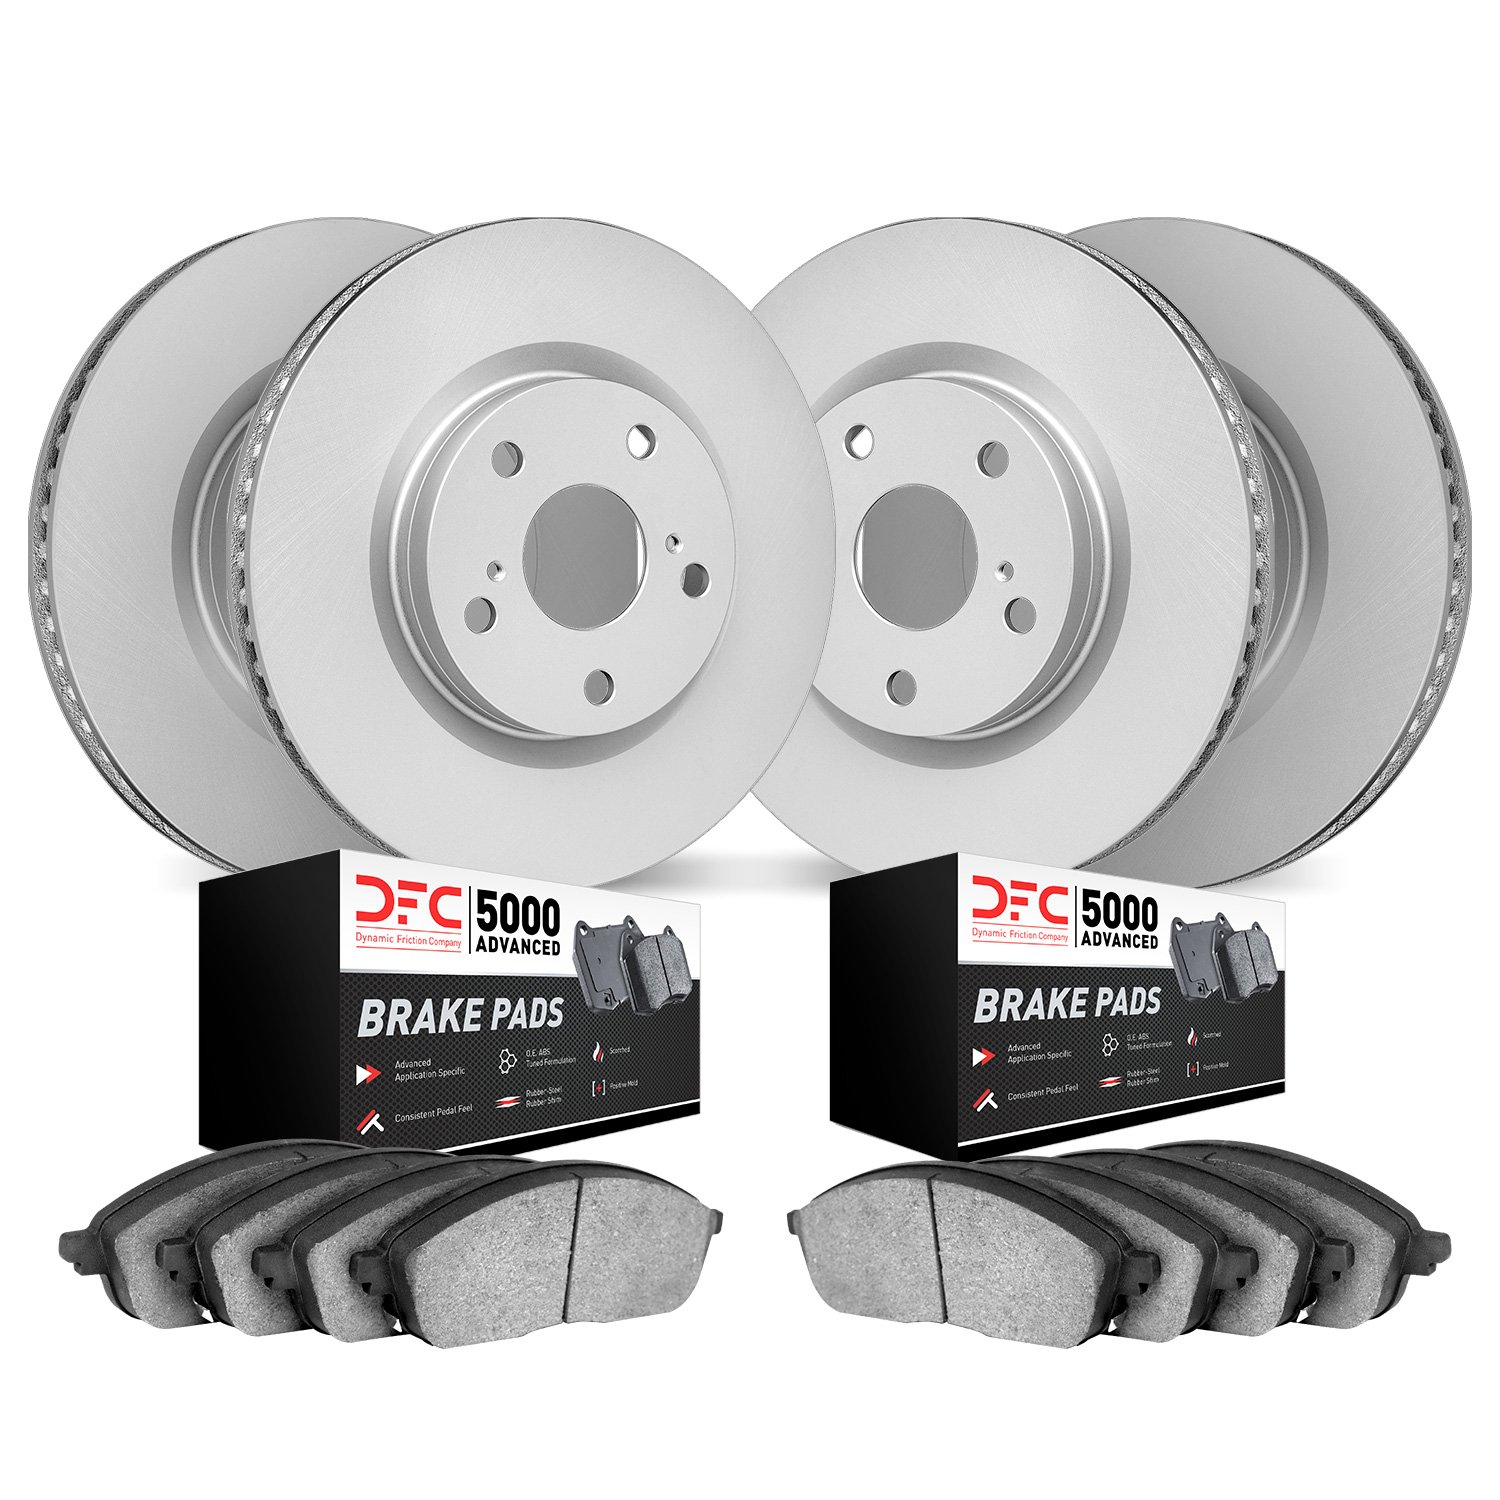 4504-63044 Geospec Brake Rotors w/5000 Advanced Brake Pads Kit, 2006-2012 Mercedes-Benz, Position: Front and Rear